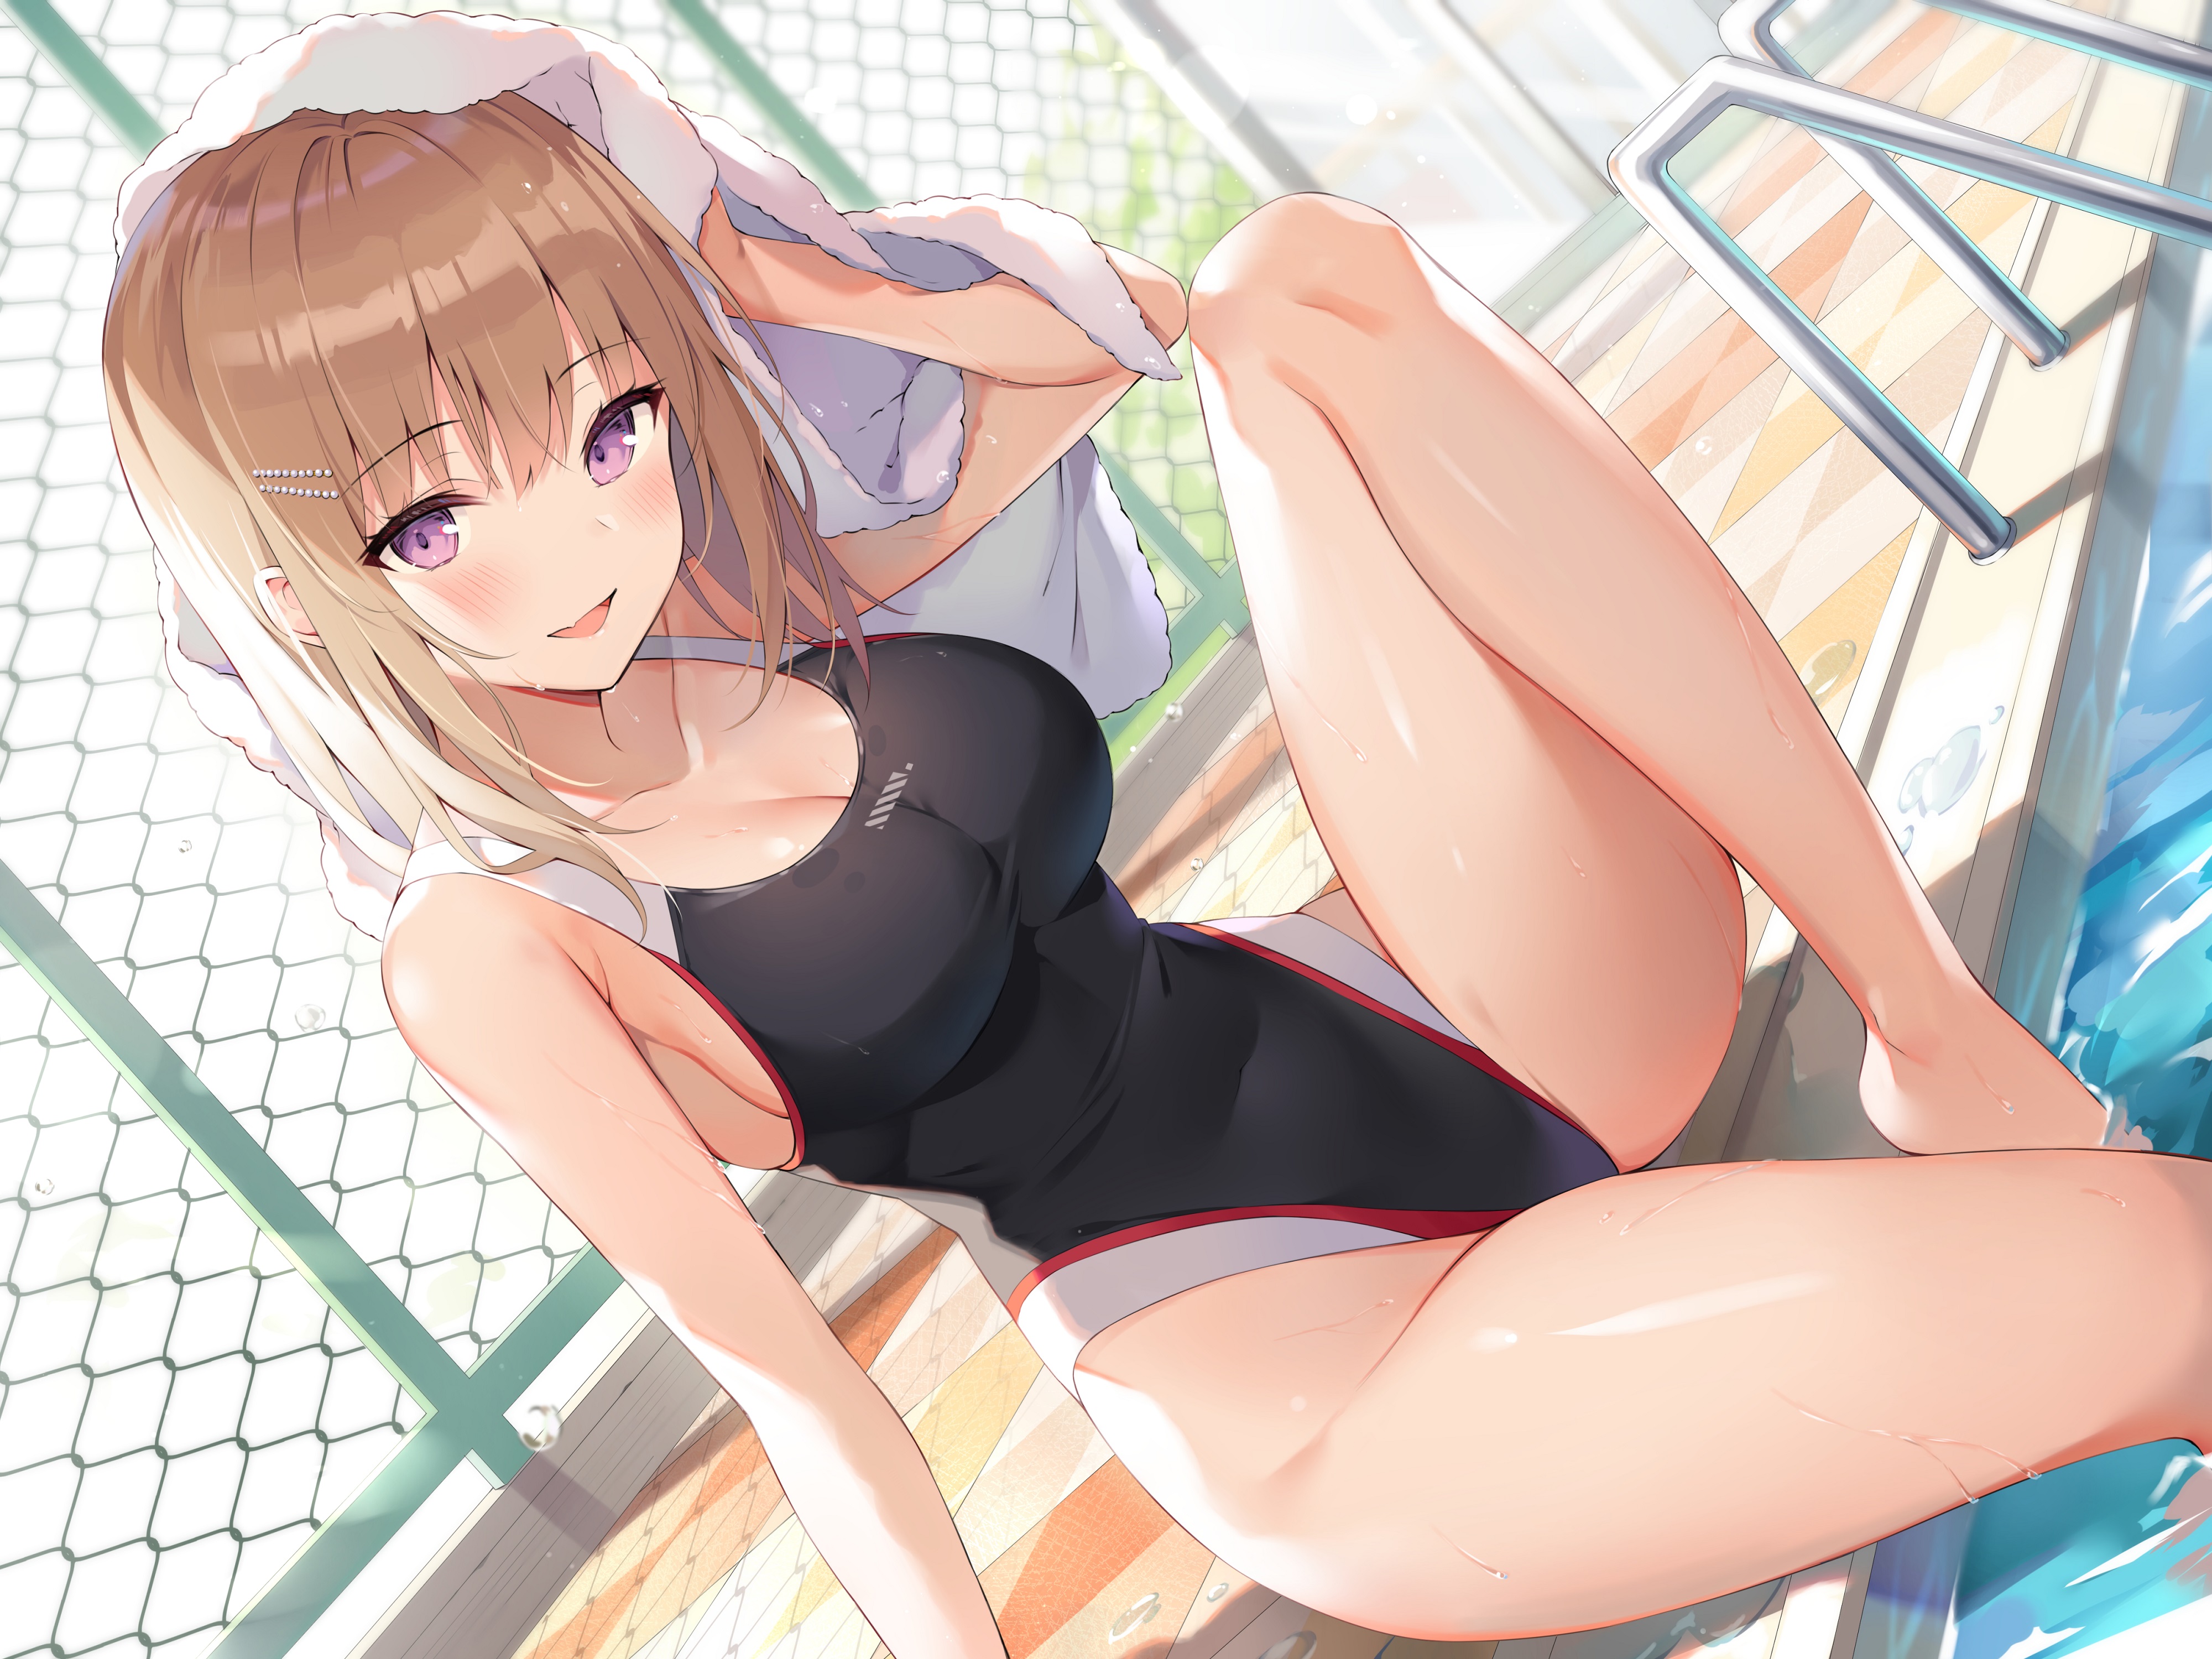 Anime 4000x3000 anime anime girls Ale Nqki brunette purple eyes smiling towel one-piece swimsuit swimming pool tight clothing boob pockets swimwear wet body thighs water drops shoulder length hair skinny big boobs sitting open mouth bright